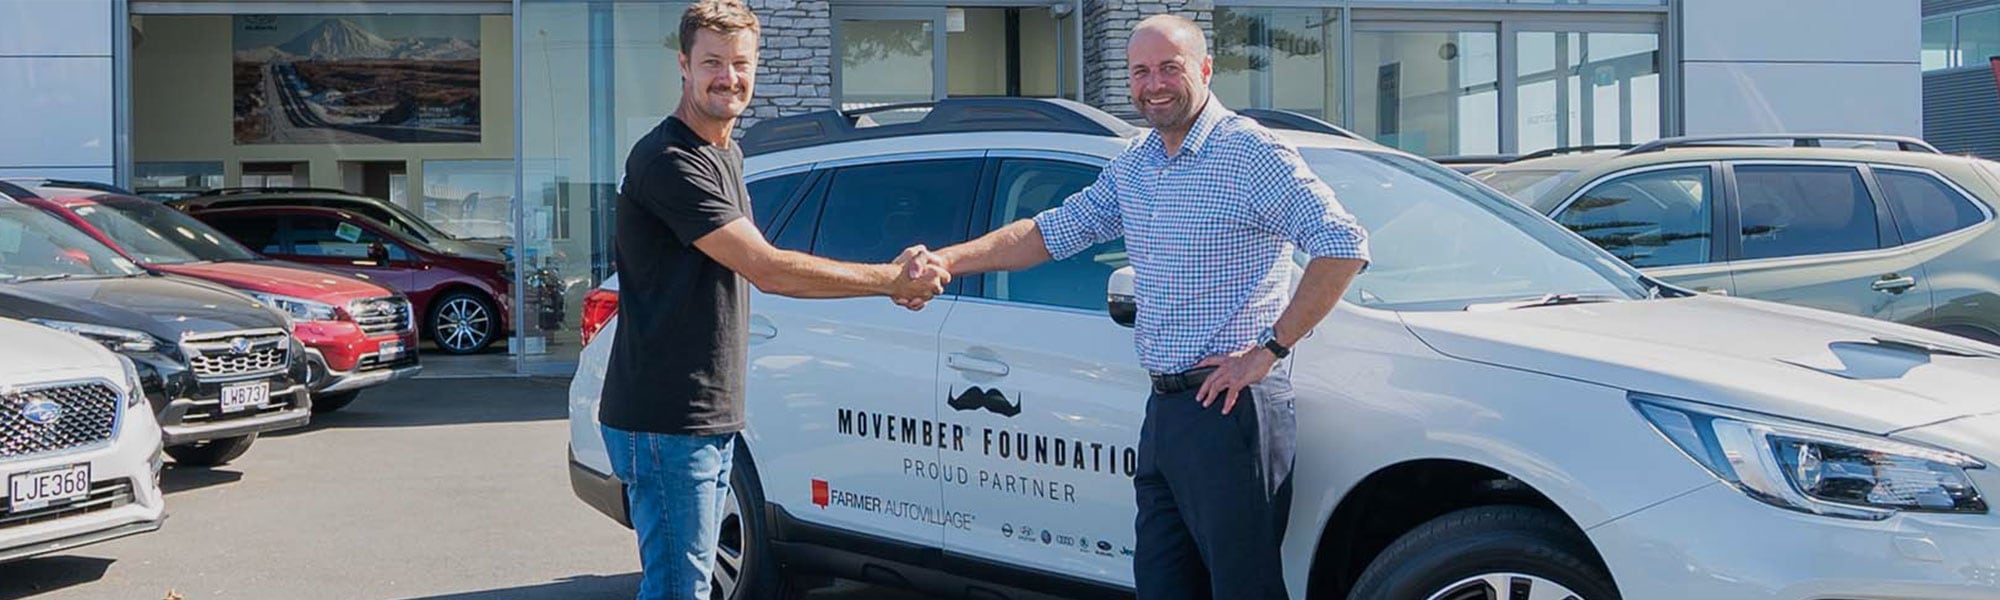 The Drive Behind the Movember Foundation